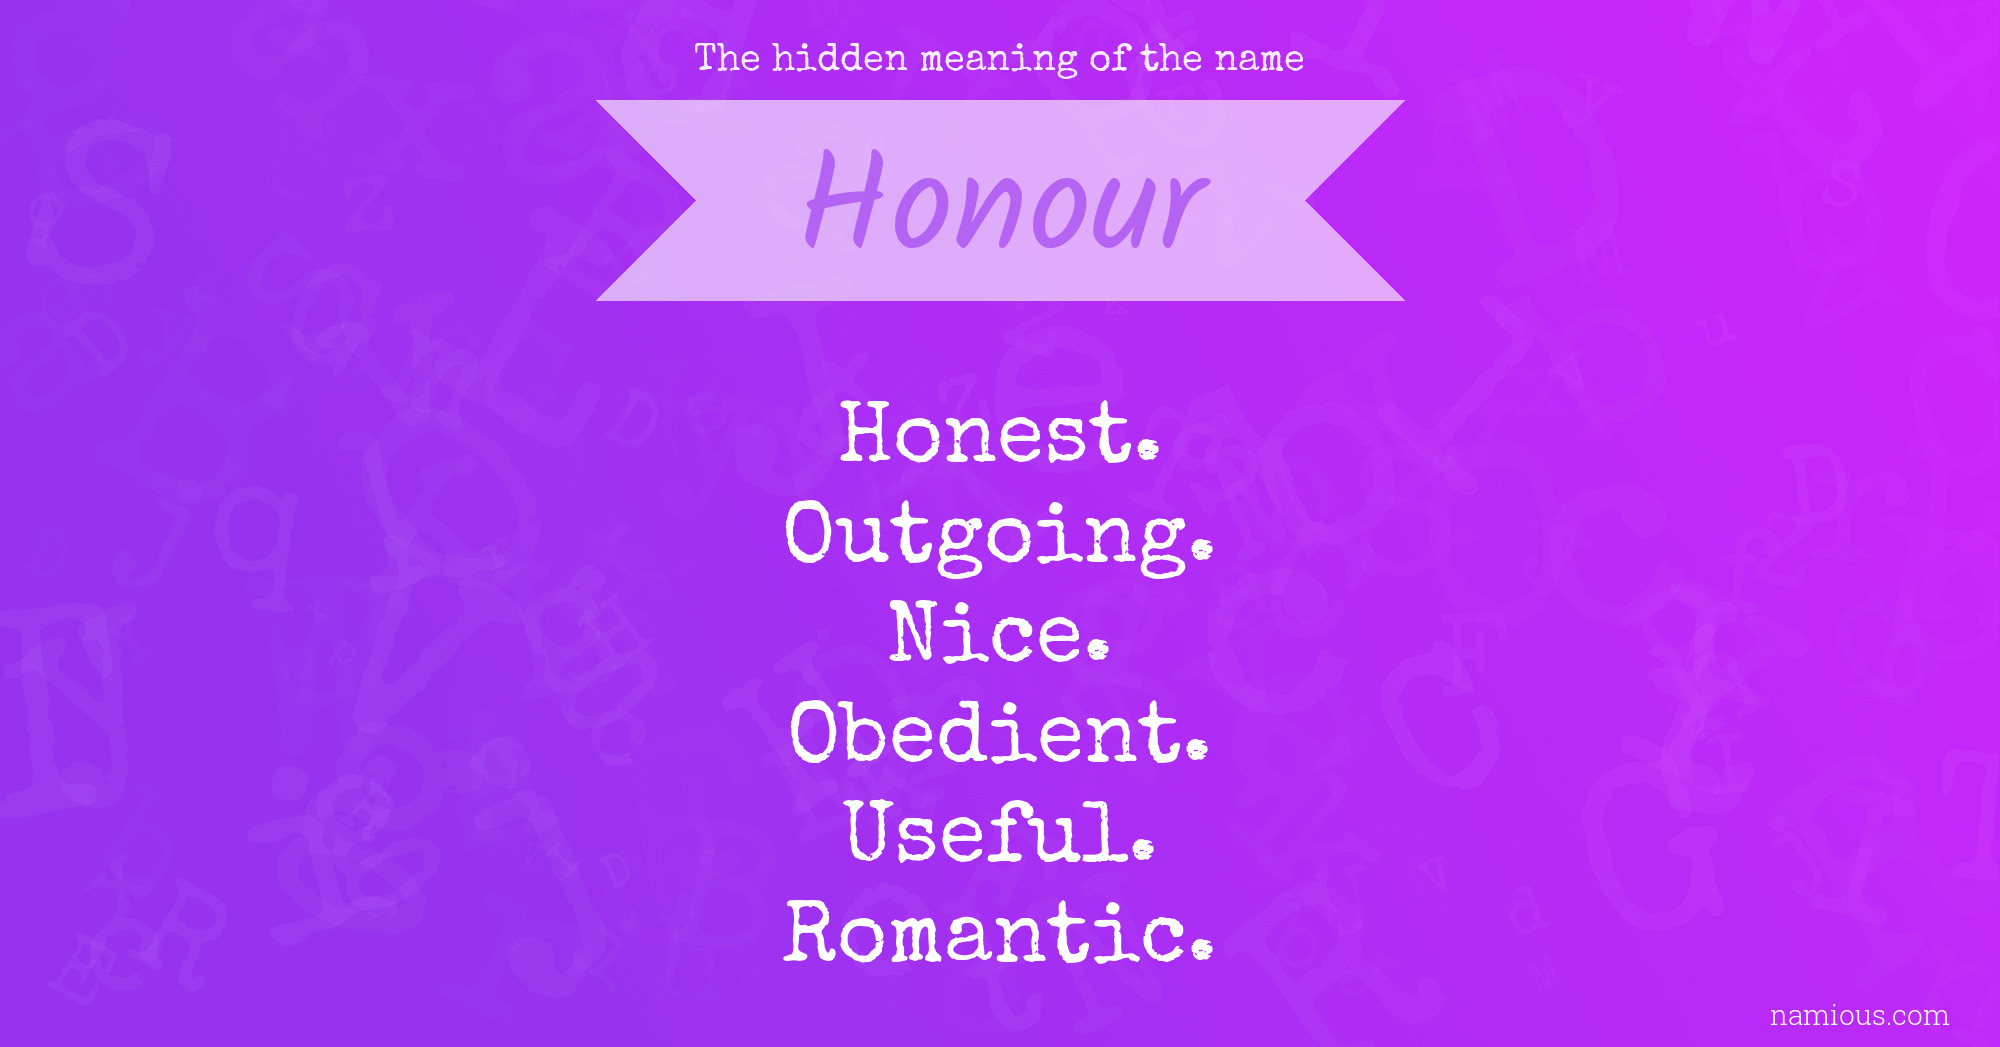 The hidden meaning of the name Honour